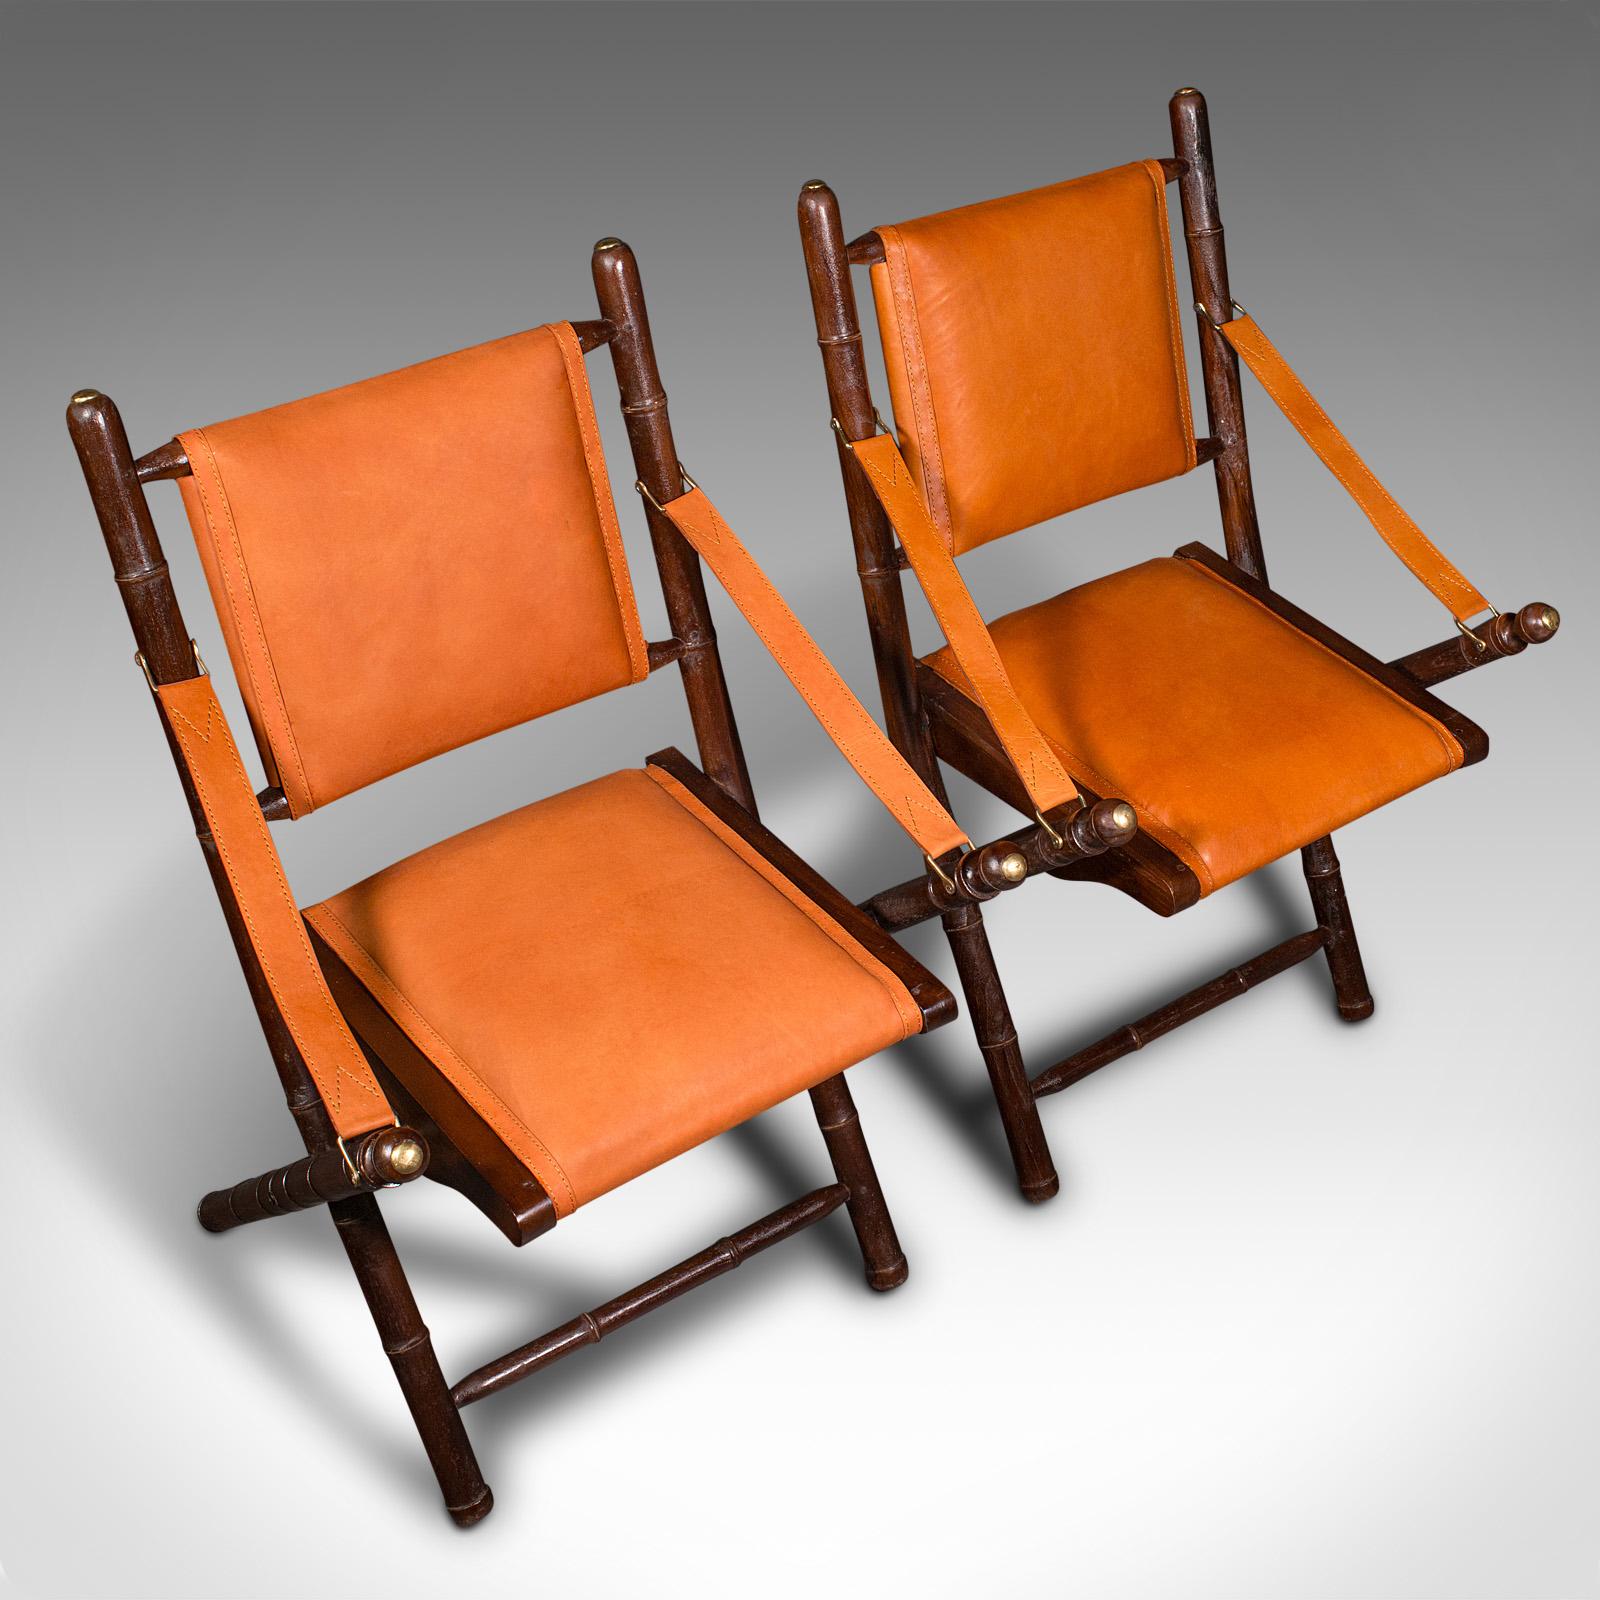 Pair Of Contemporary Orangery Chairs, English, Leather, Veranda, Patio, Seat For Sale 5